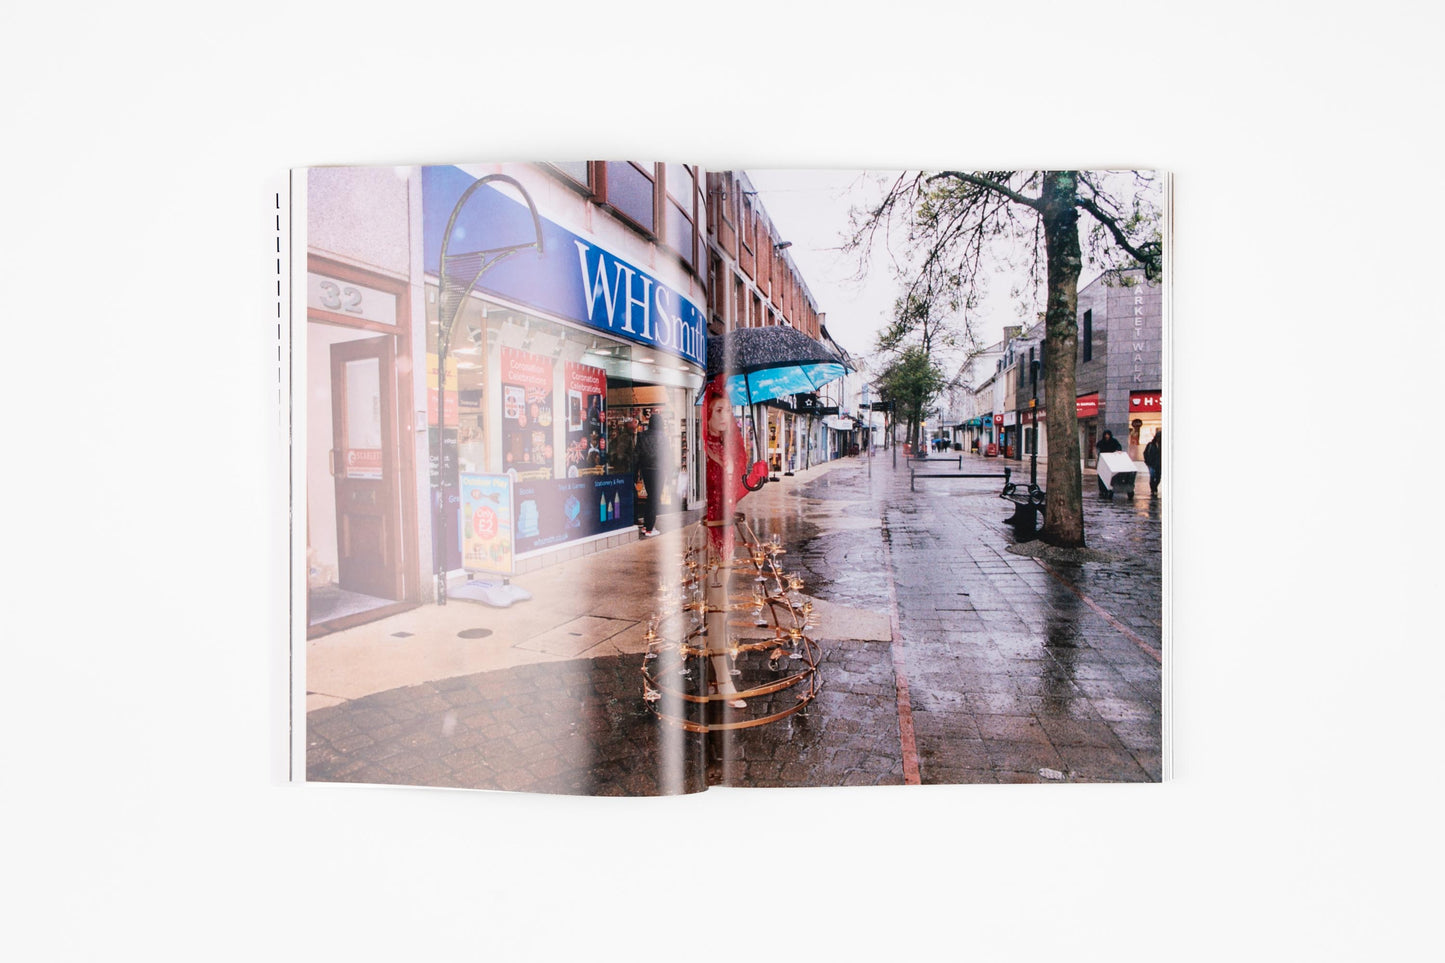 Middle Plane Issue 7: Soho 11:38pm by Jack Day